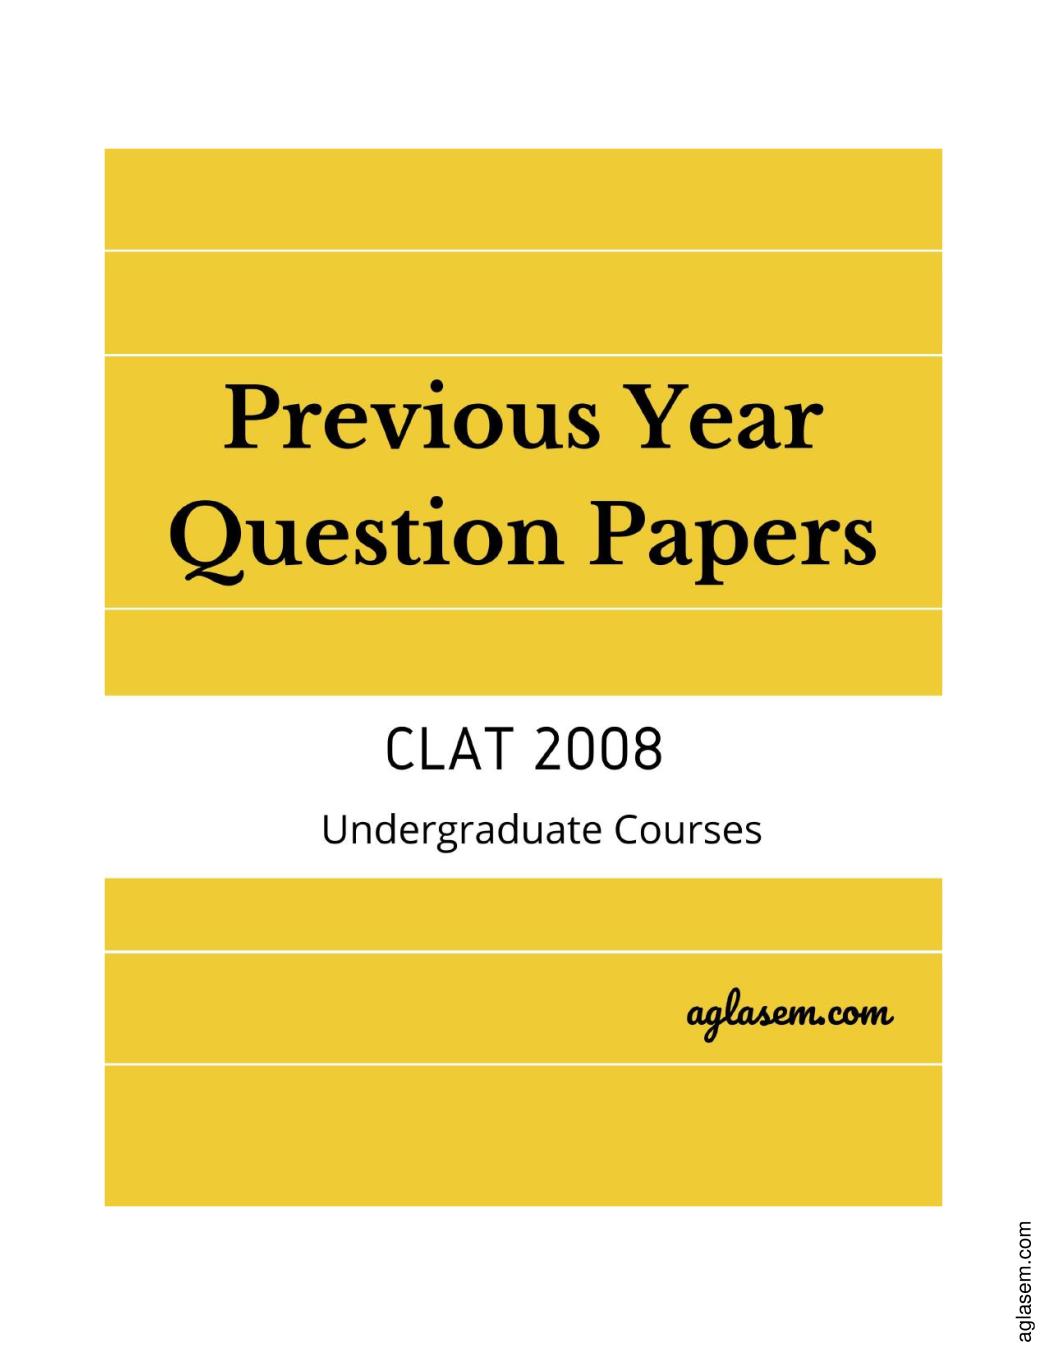 CLAT 2008 Question Paper - Page 1